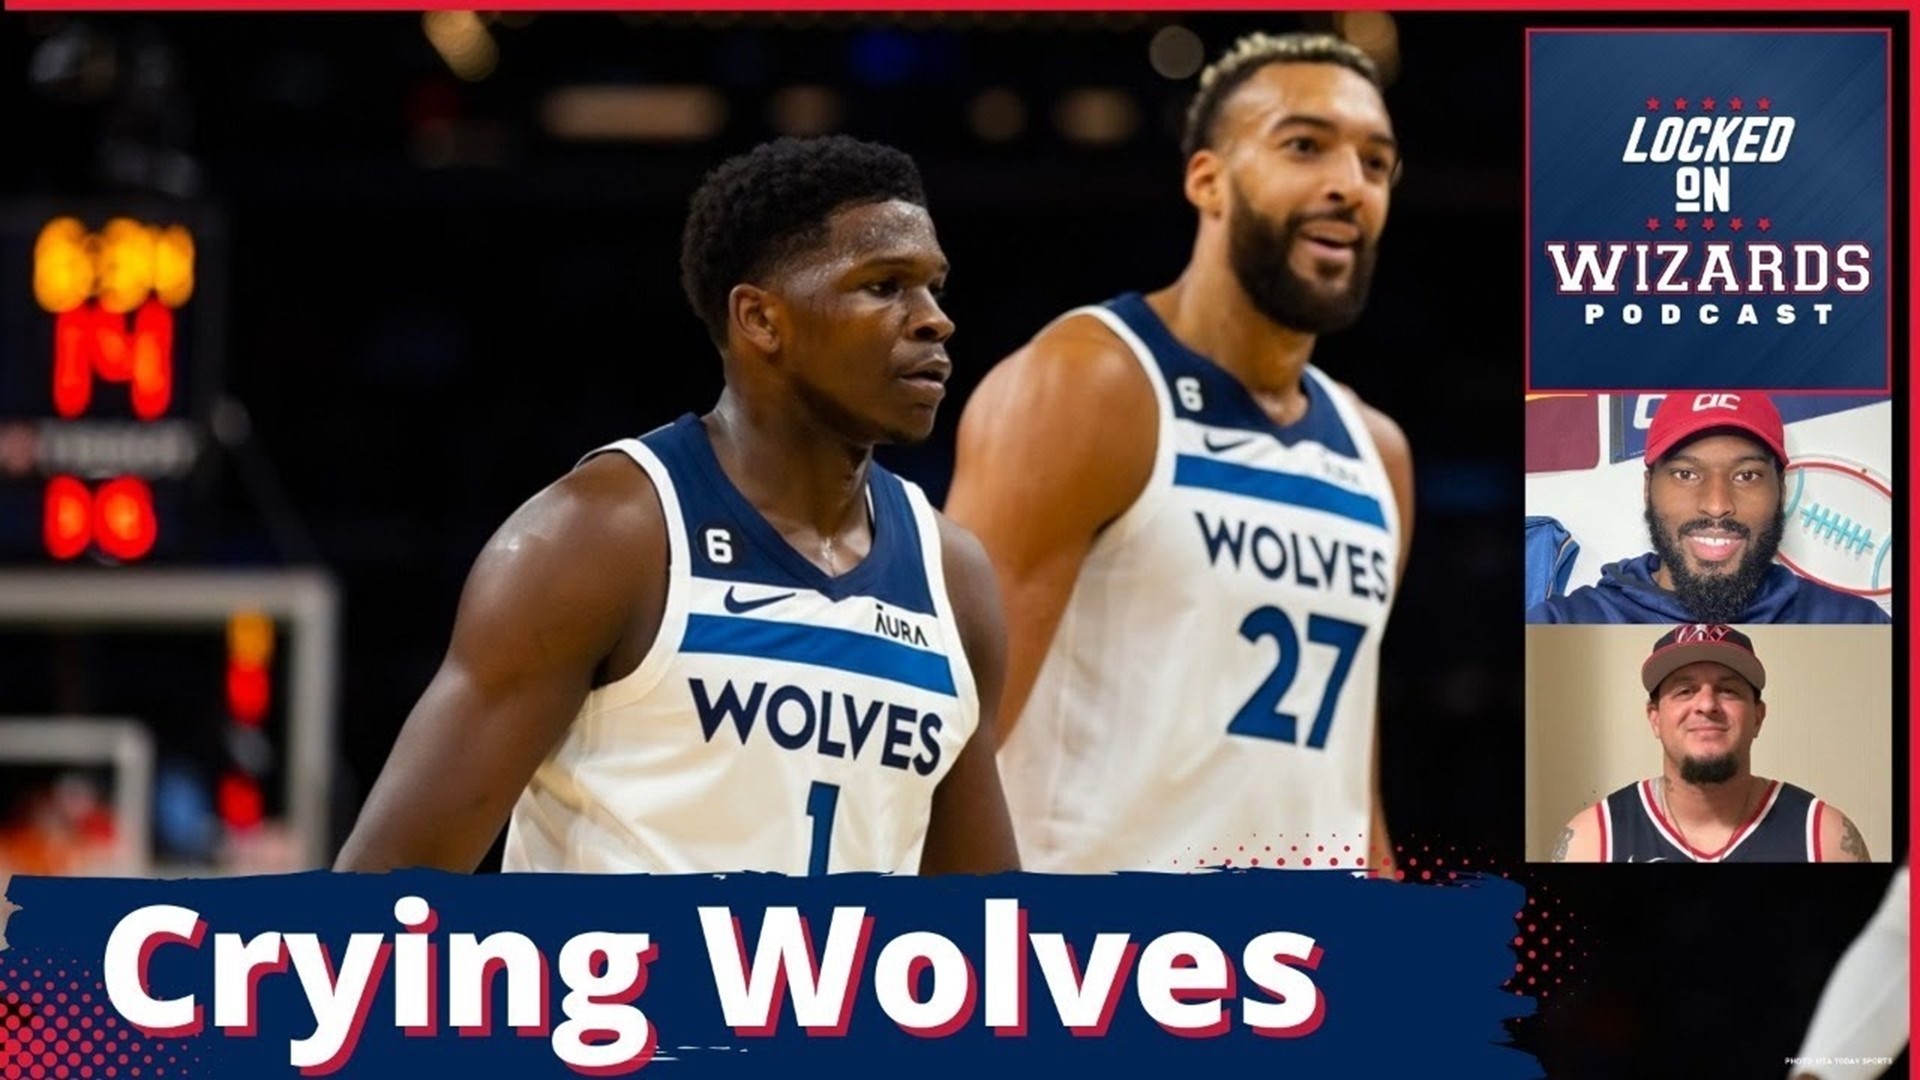 Brandon recaps the Wizards loss to the T-Wolves. He ends the show responding to watchers and listeners.